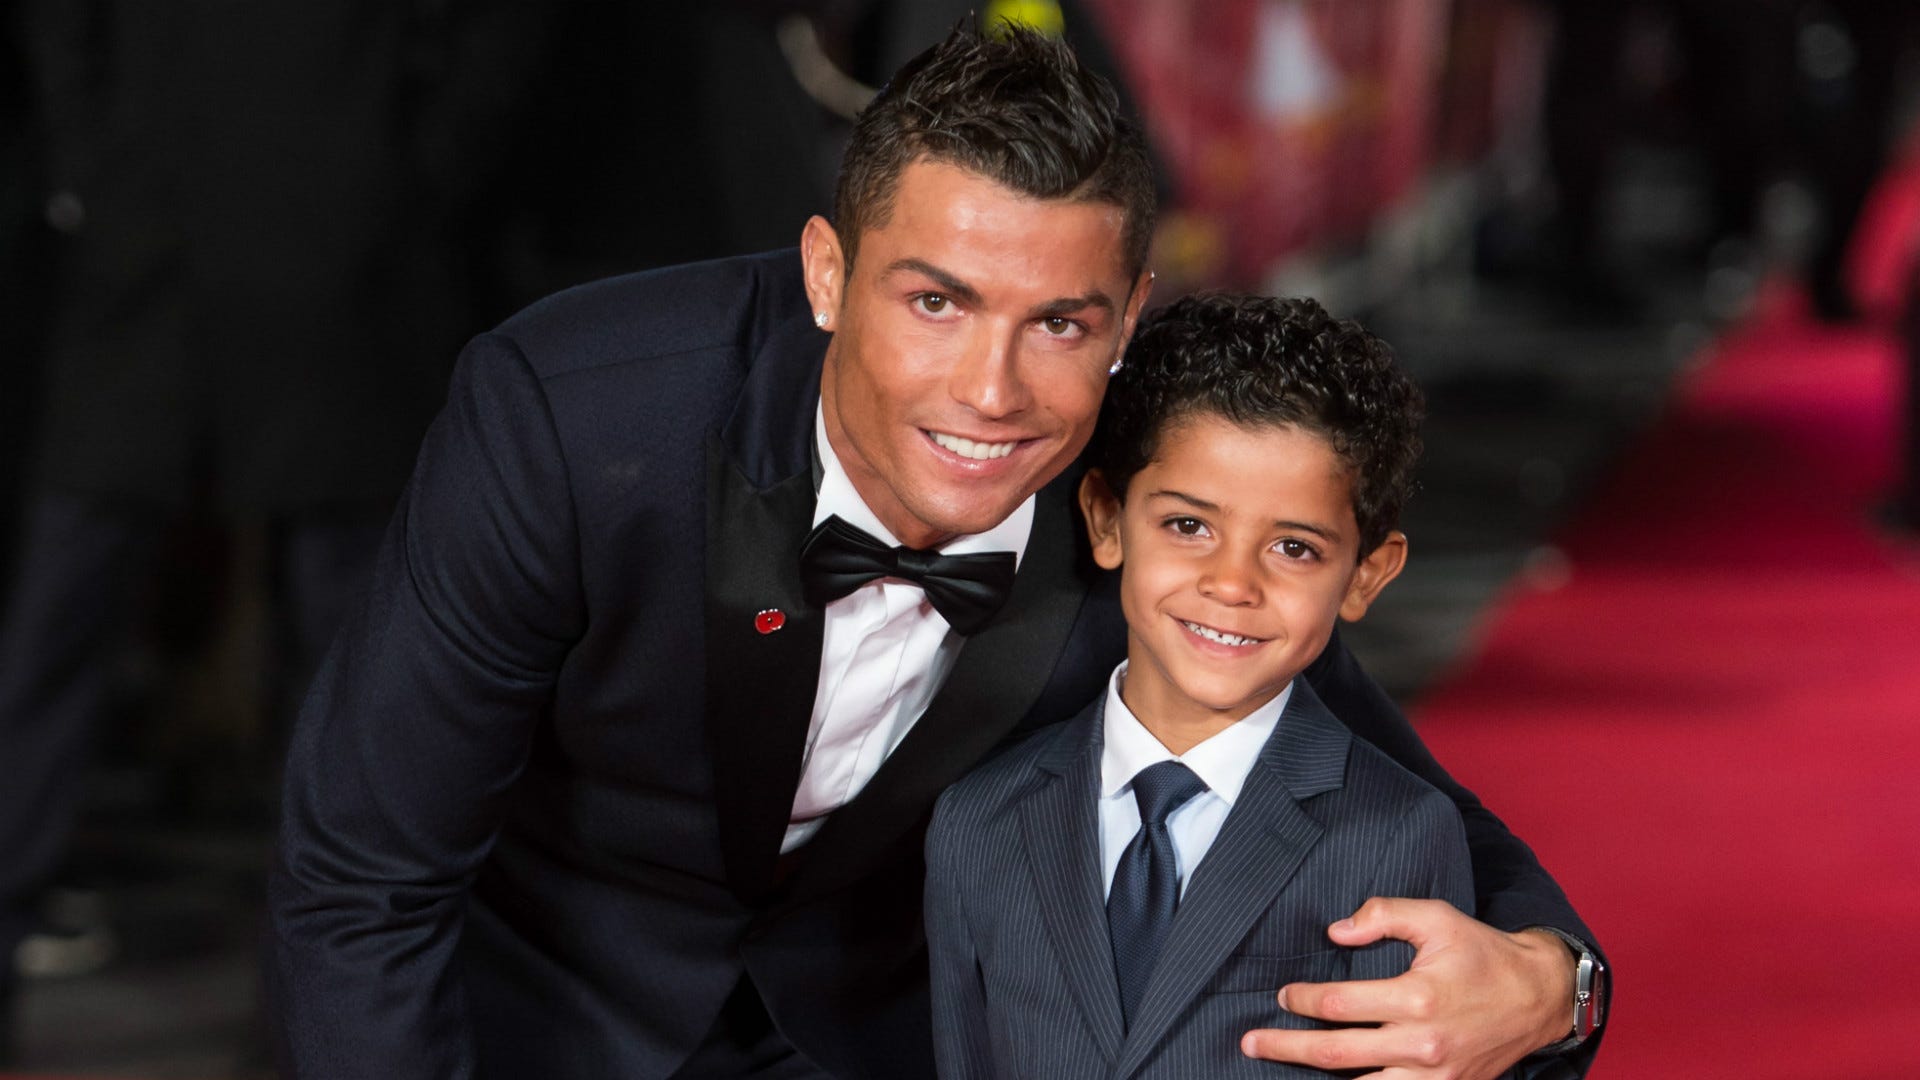 rr Despite his son having amassed millions of dollars in earnings, Cristiano Ronaldo remains firm in his decision not to permit the use of a phone. - LifeAnimal